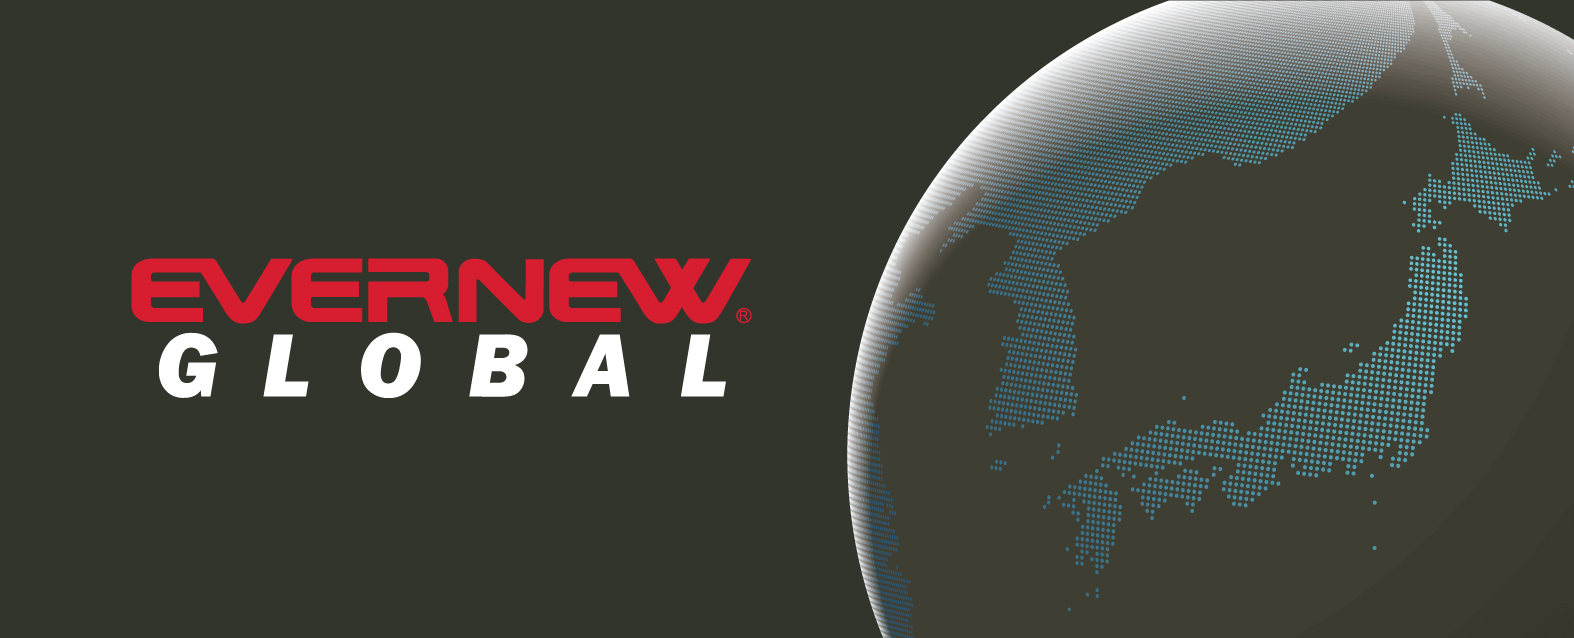 EVERNEW global